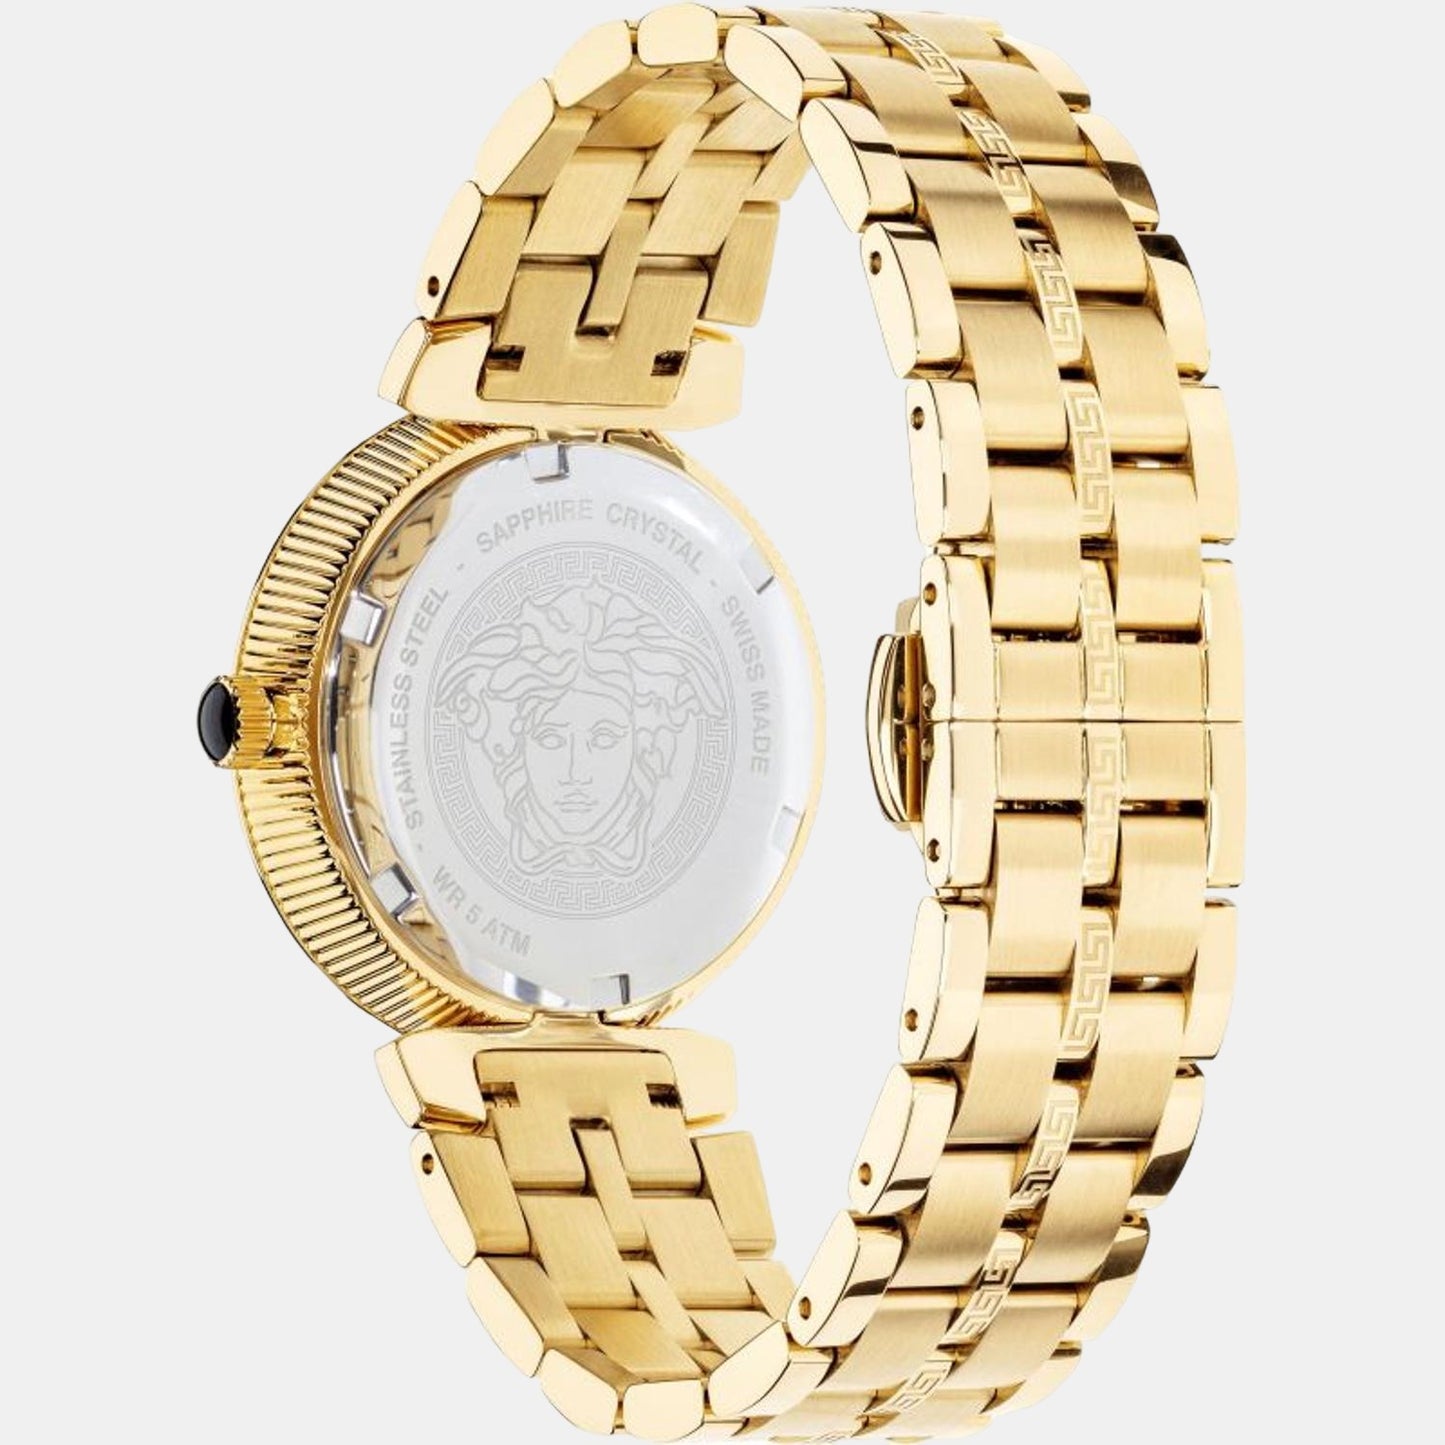 versace-stainless-steel-white-analog-female-watch-vez600621